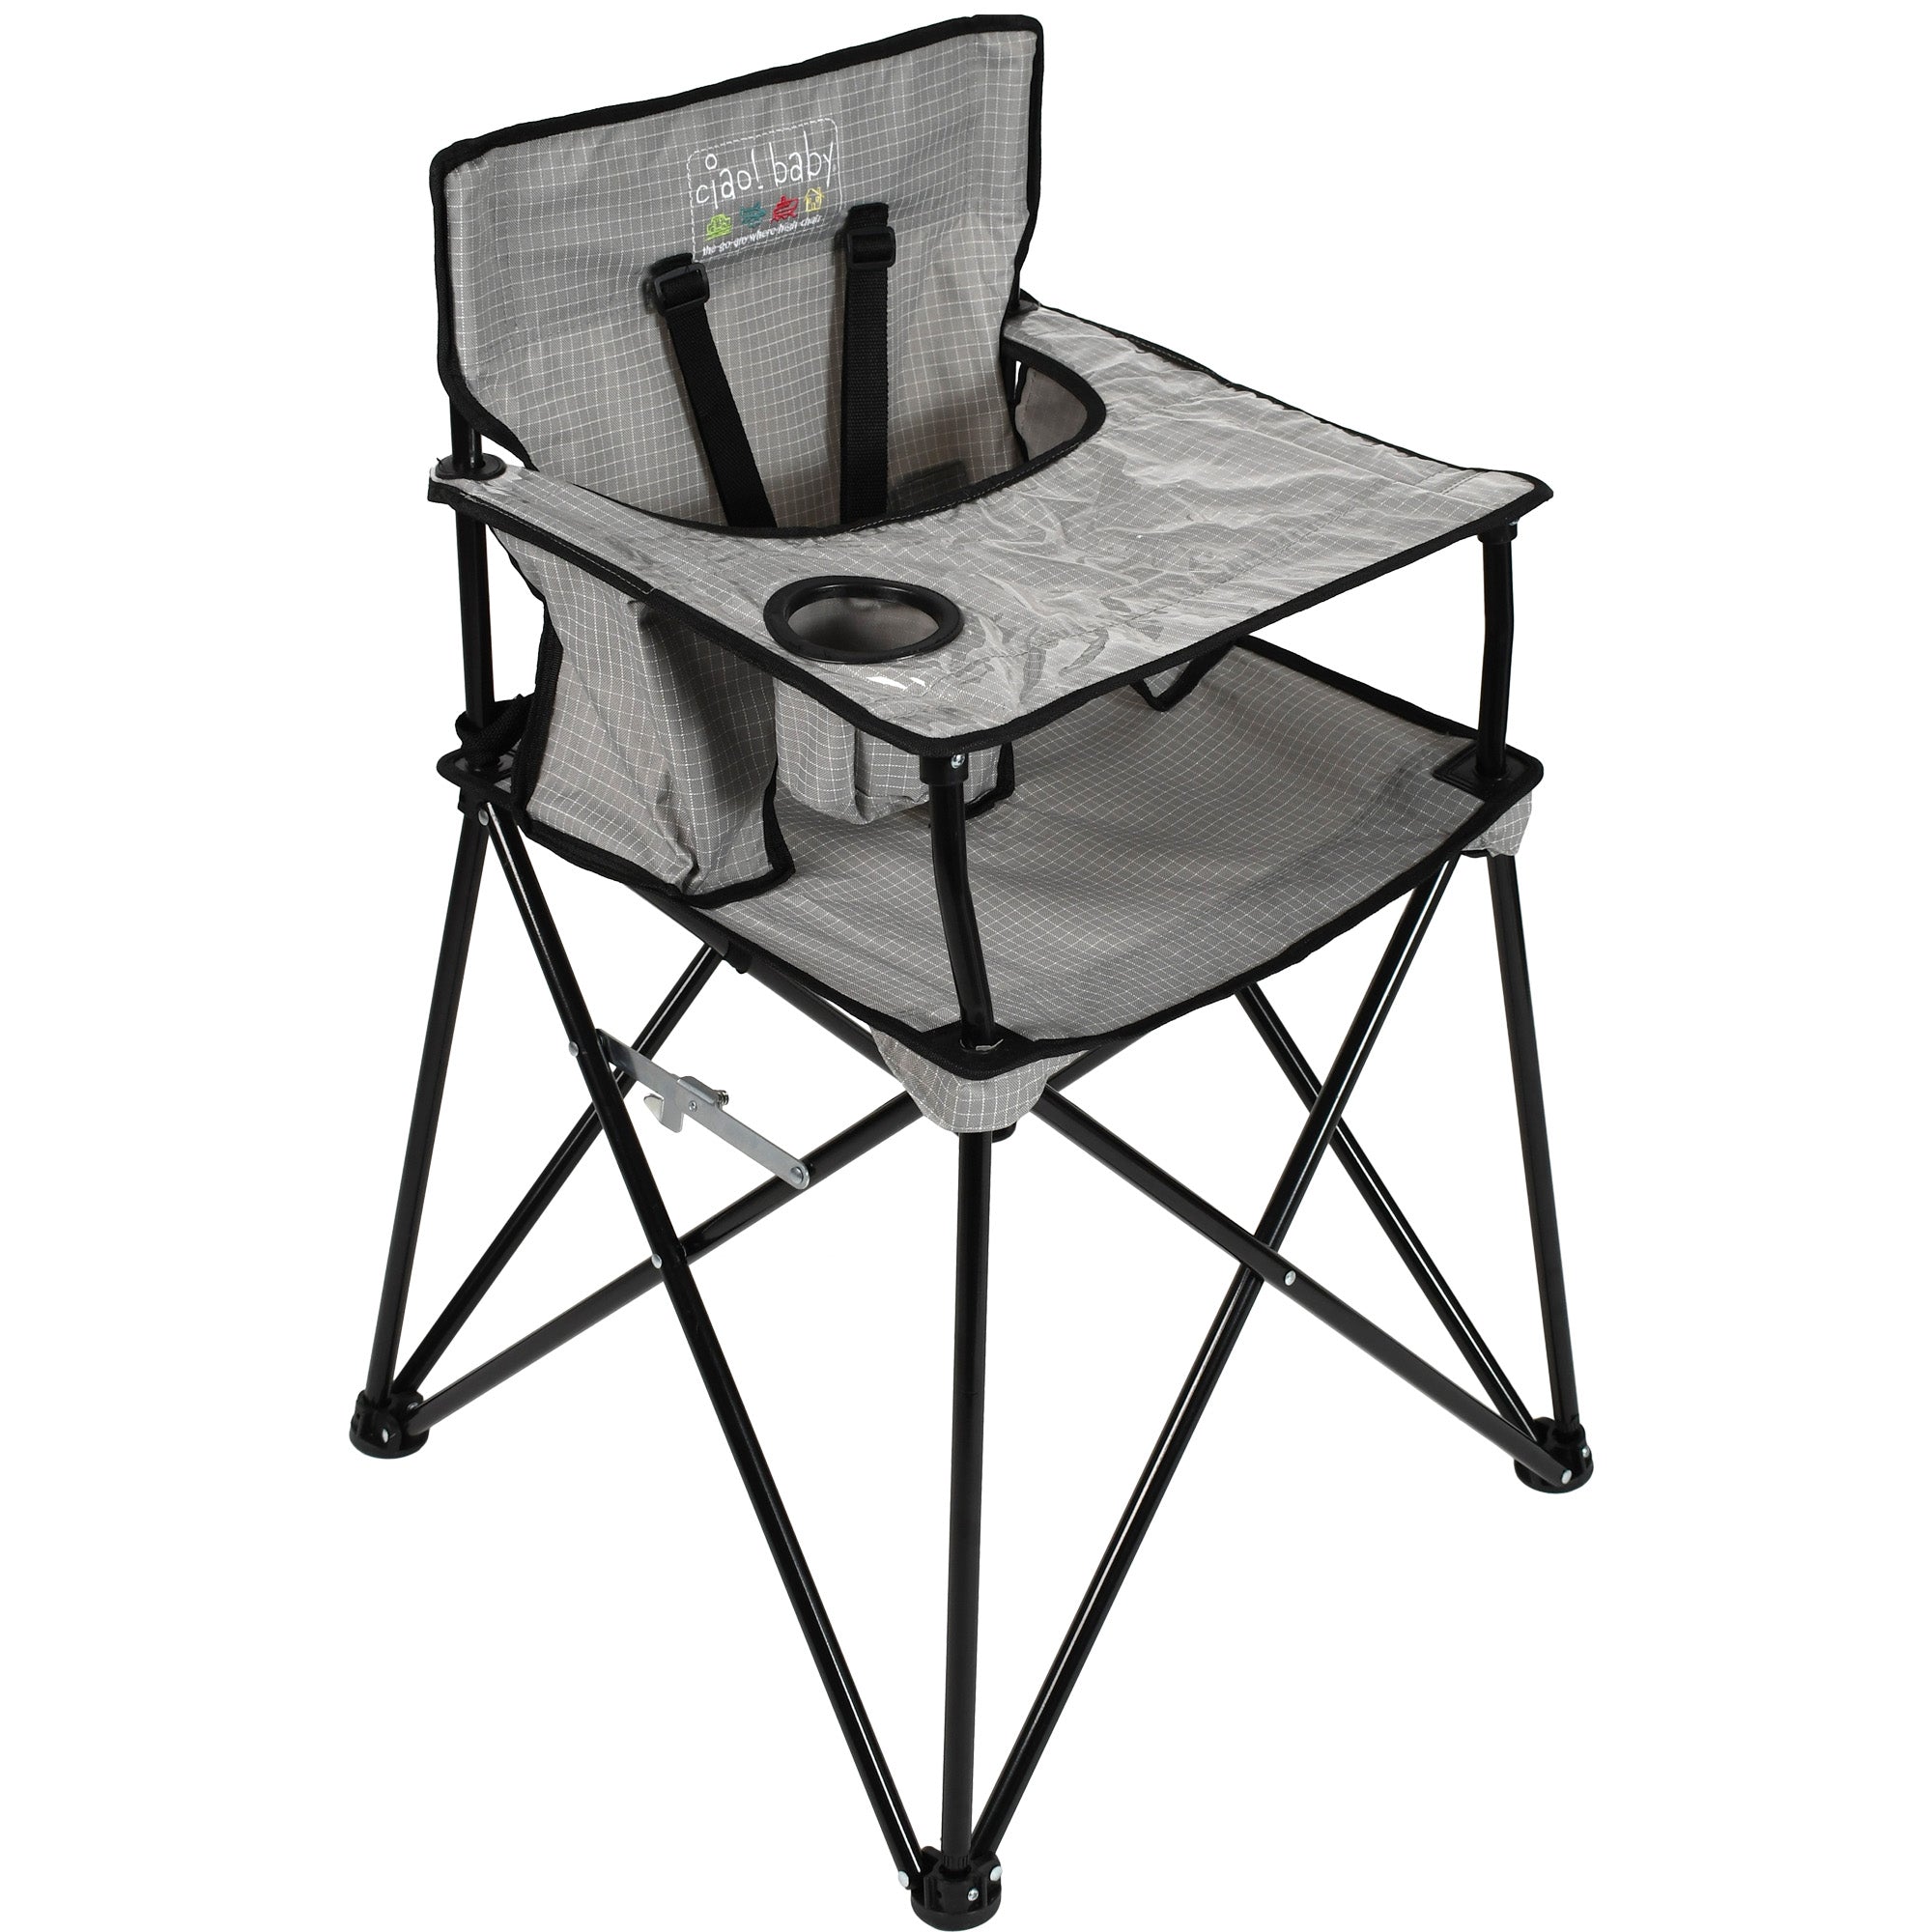 Ciao! Baby® High Chair, Dove Grey Check